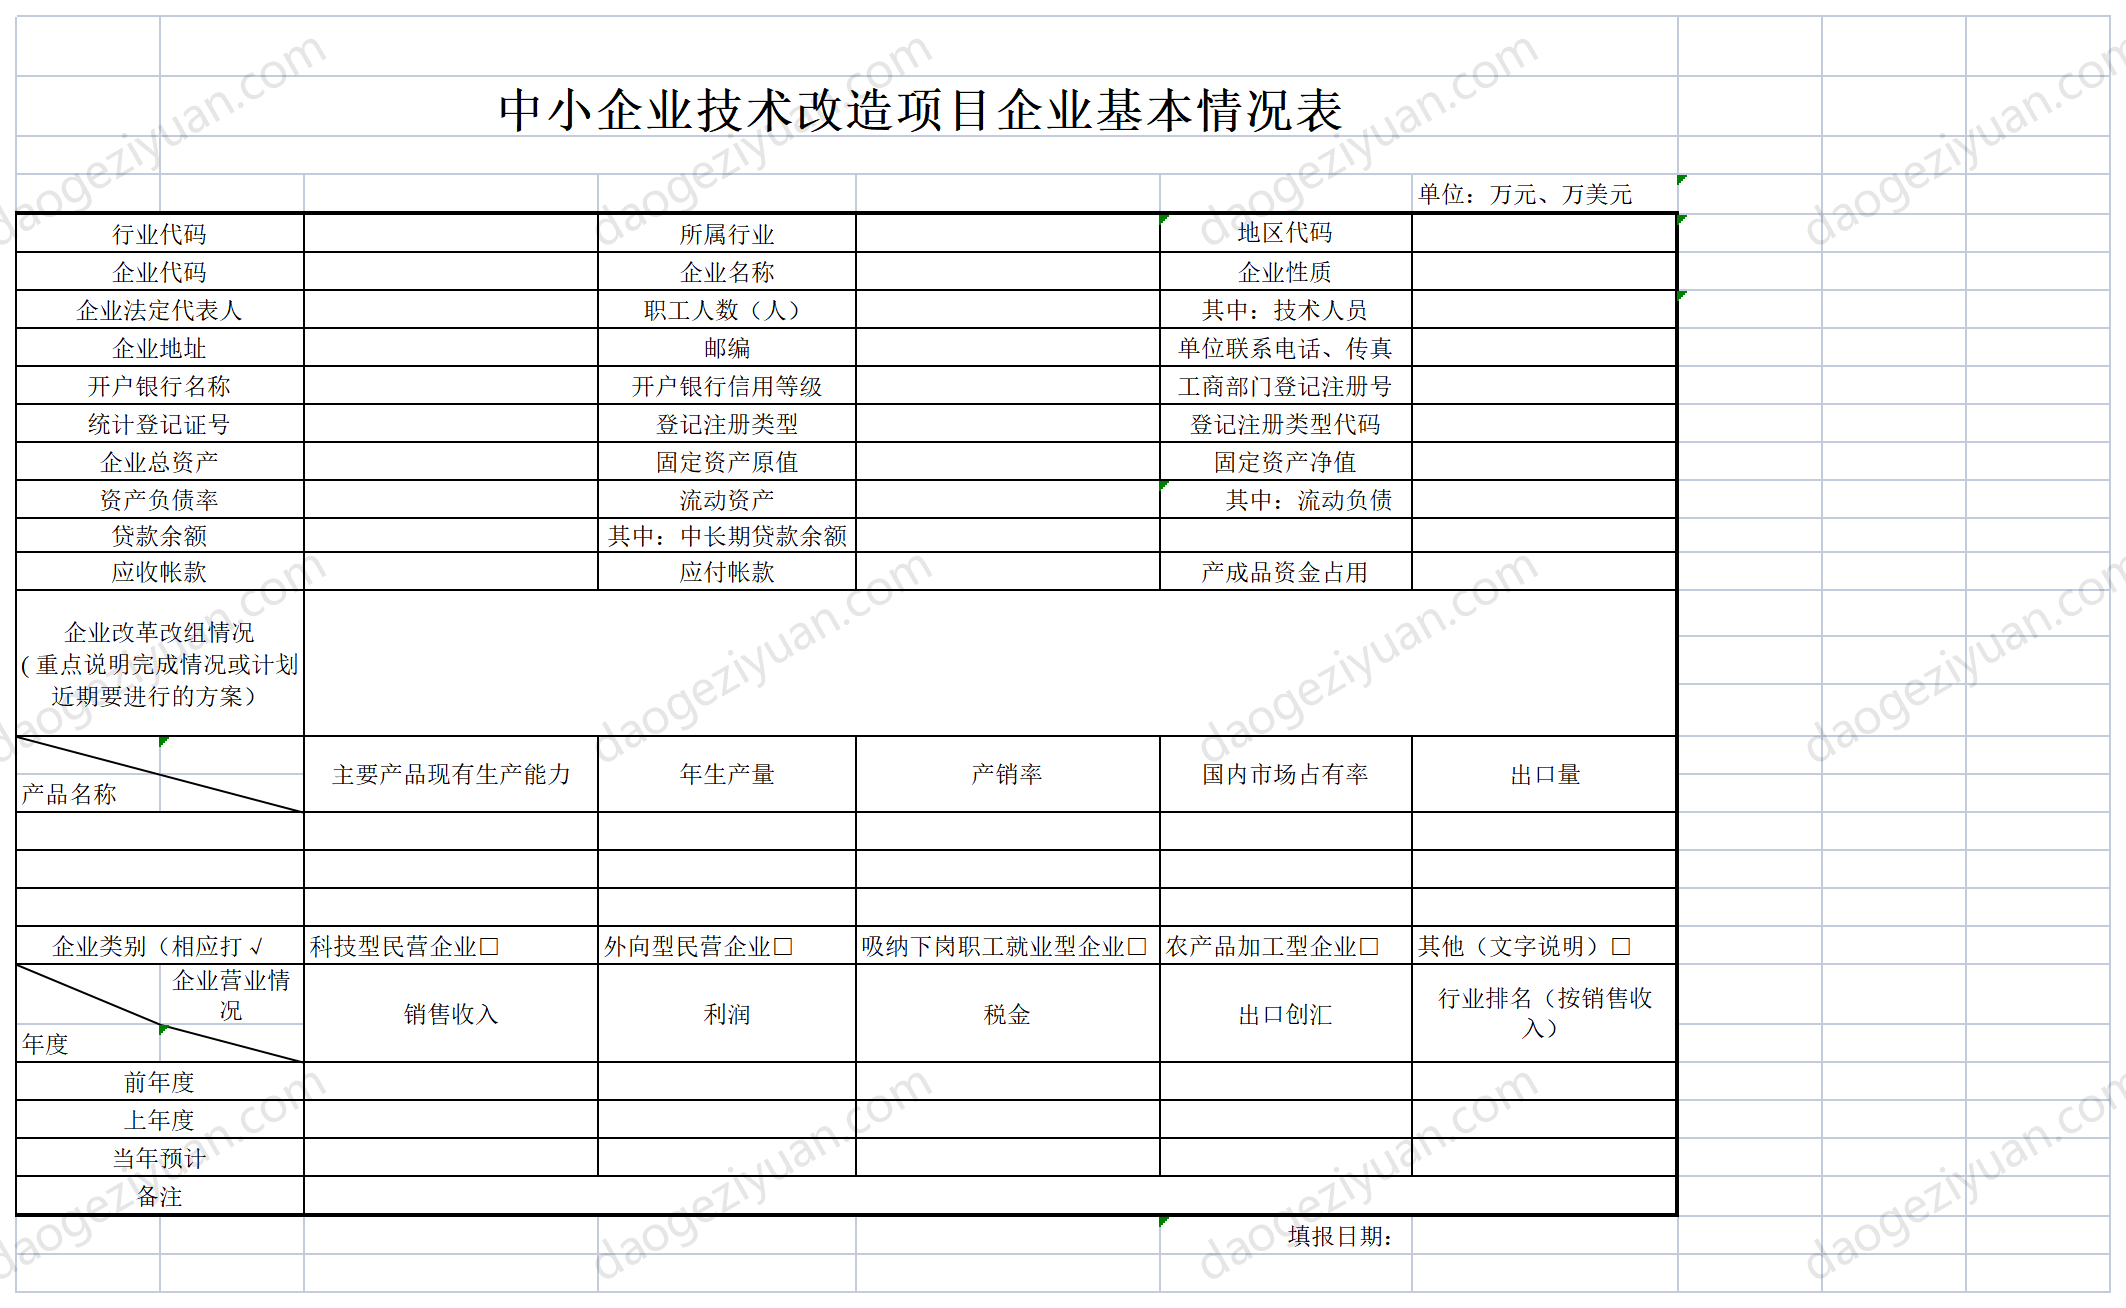 Enterprise basic situation table for technological transformation projects of small and medium-sized enterprises.xls